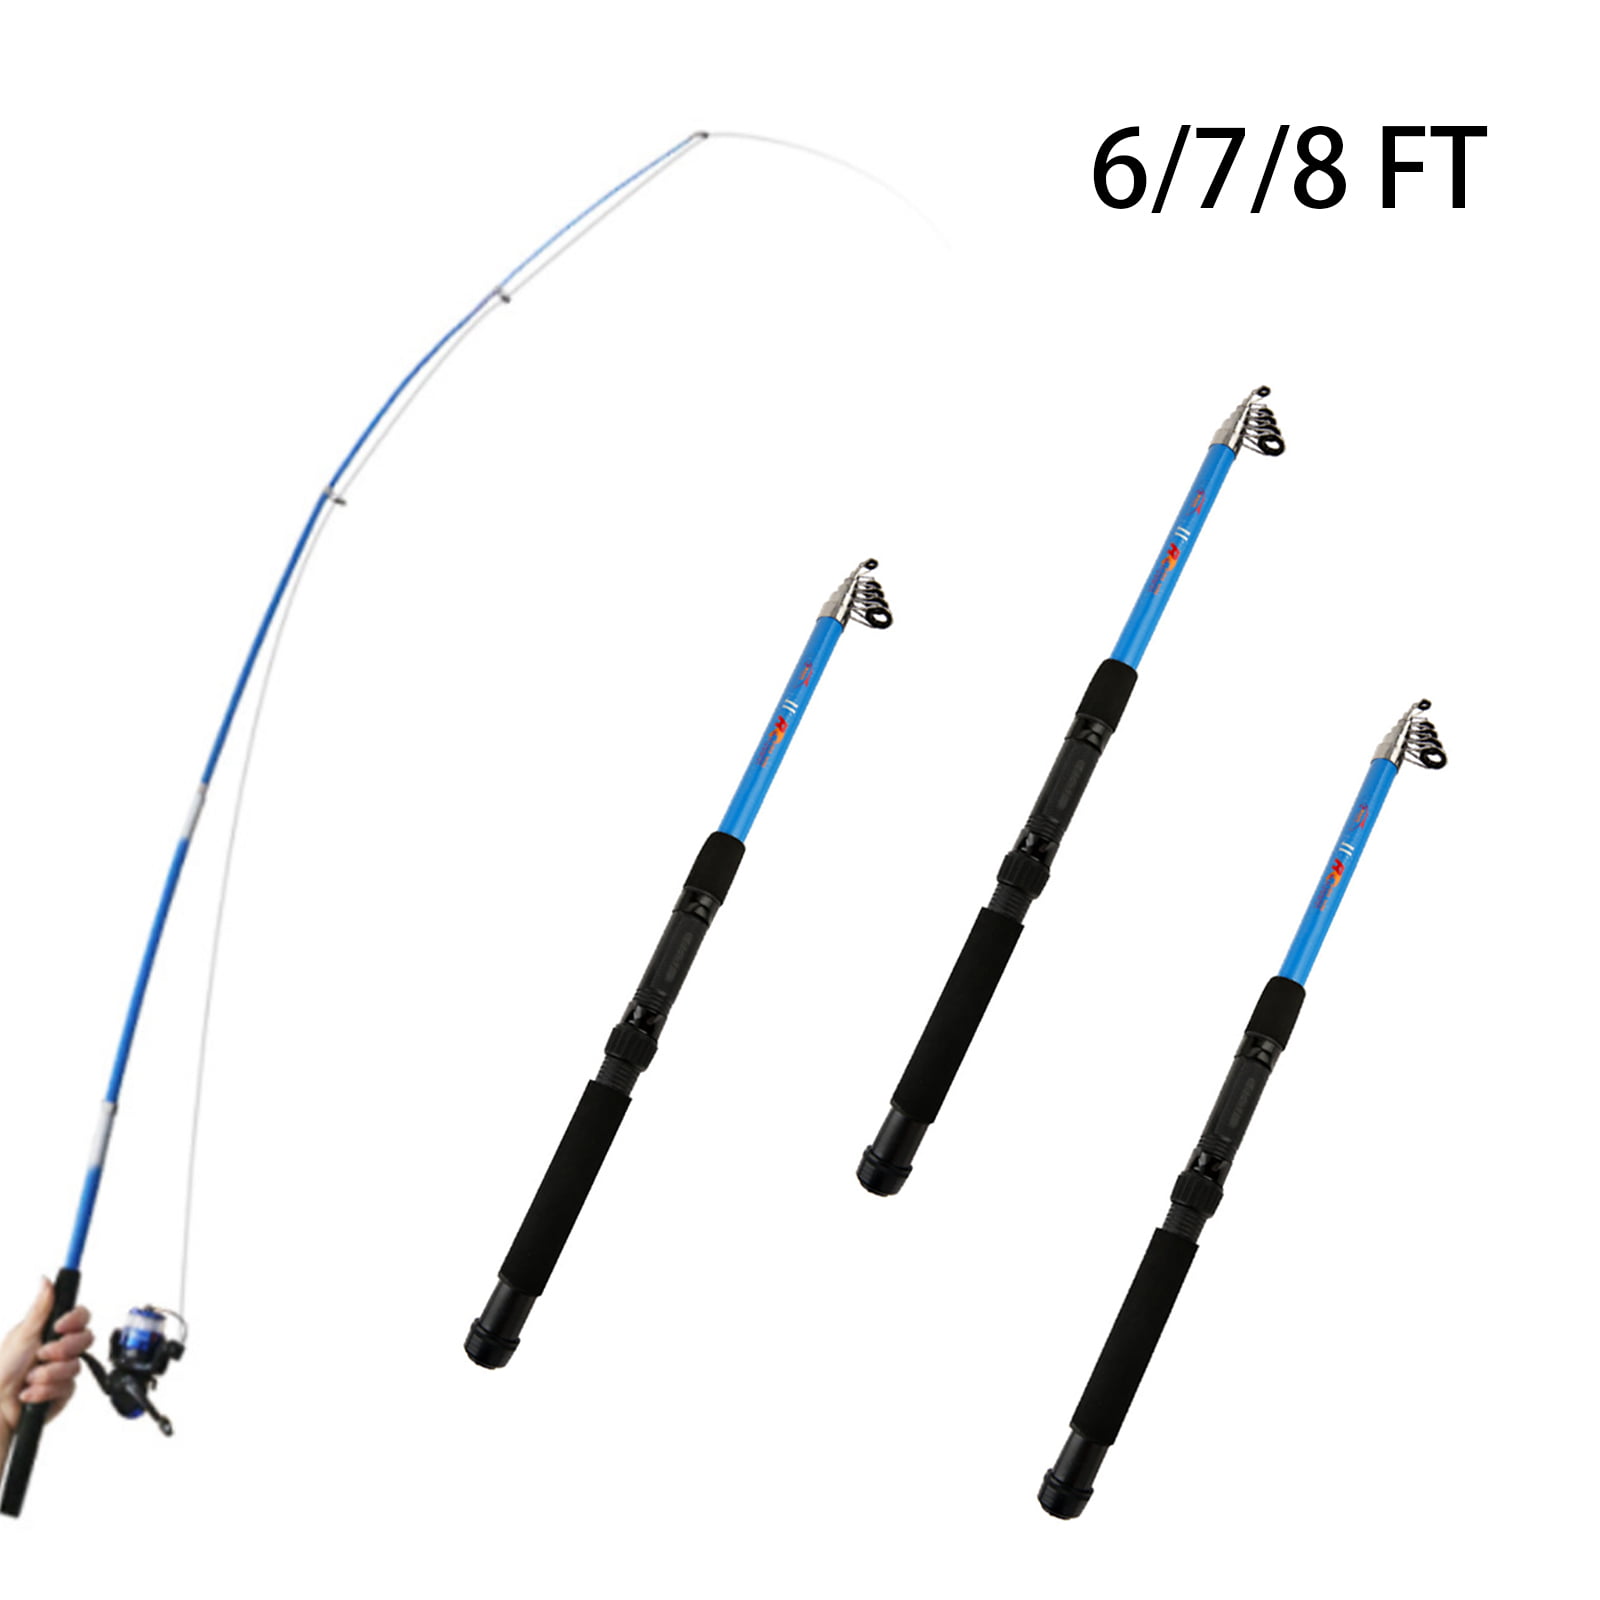 8' 9' Bass Trout Travel Telescopic Pole 7' Spinning Fishing Rods 6'8'' 